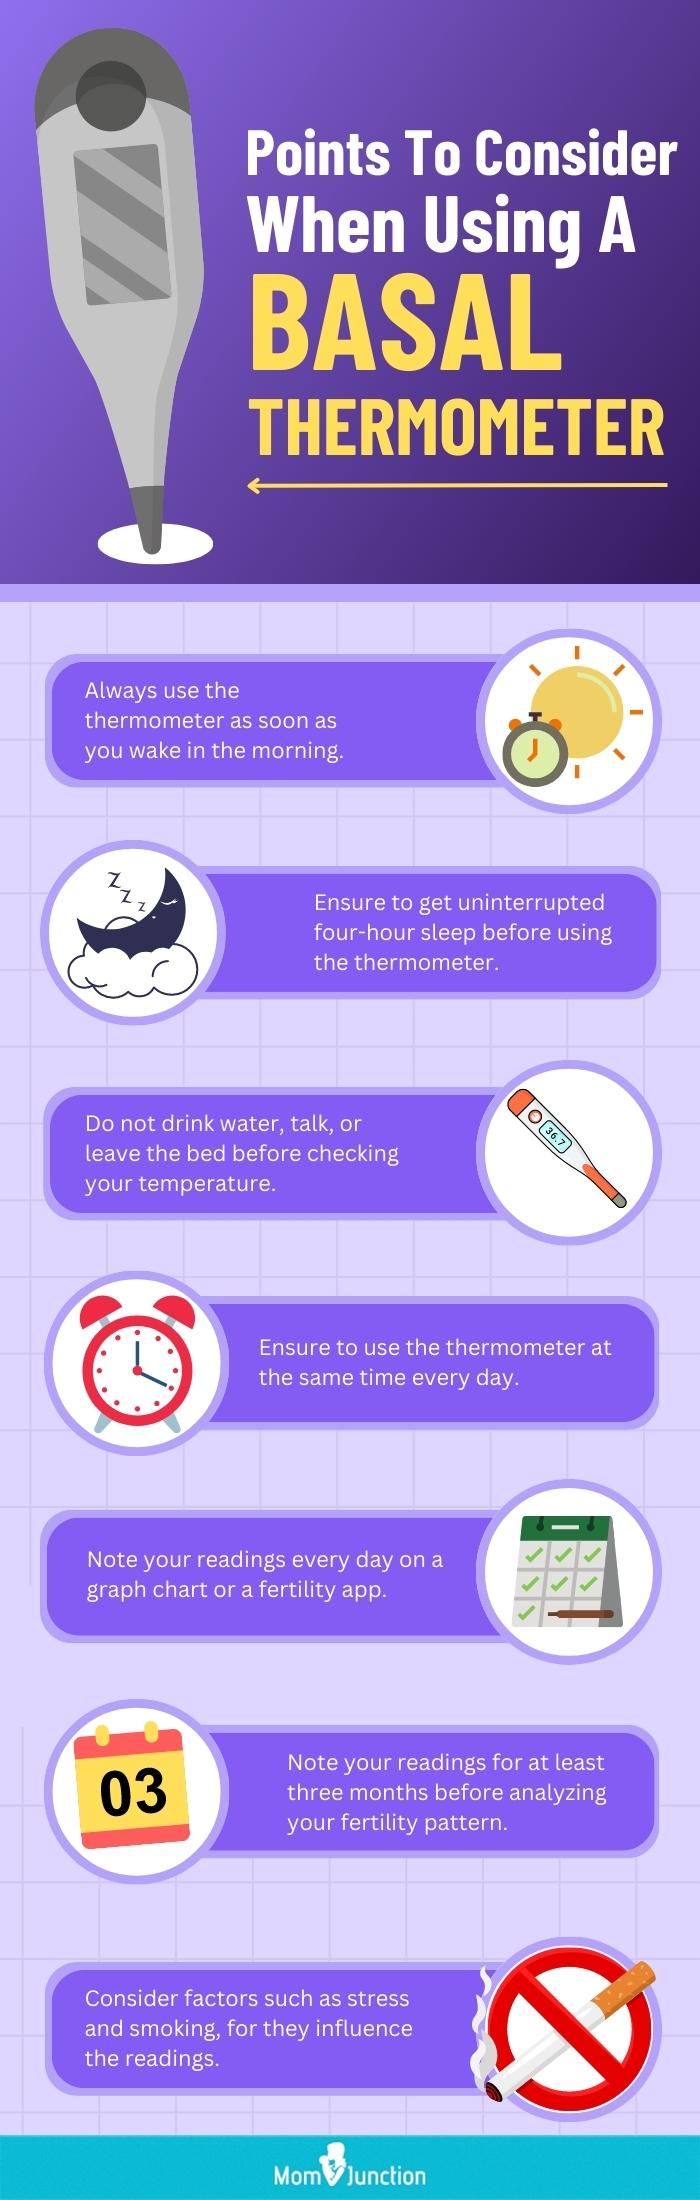 What to Know Before You Buy a Basal Body Thermometer